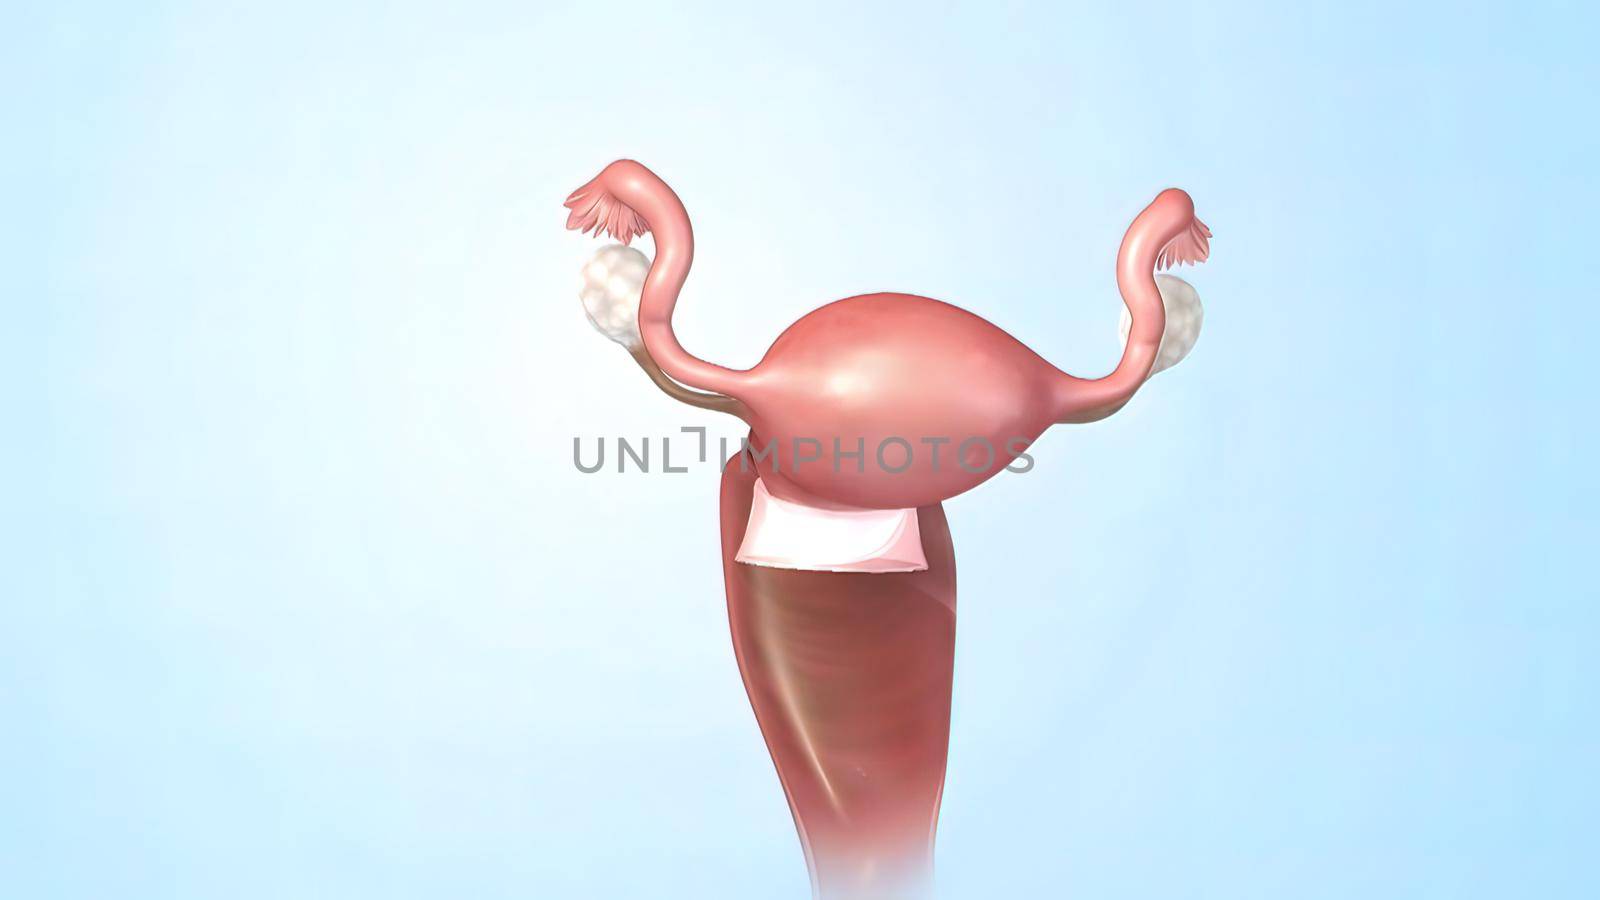 Female Reproductive System 3D illustration